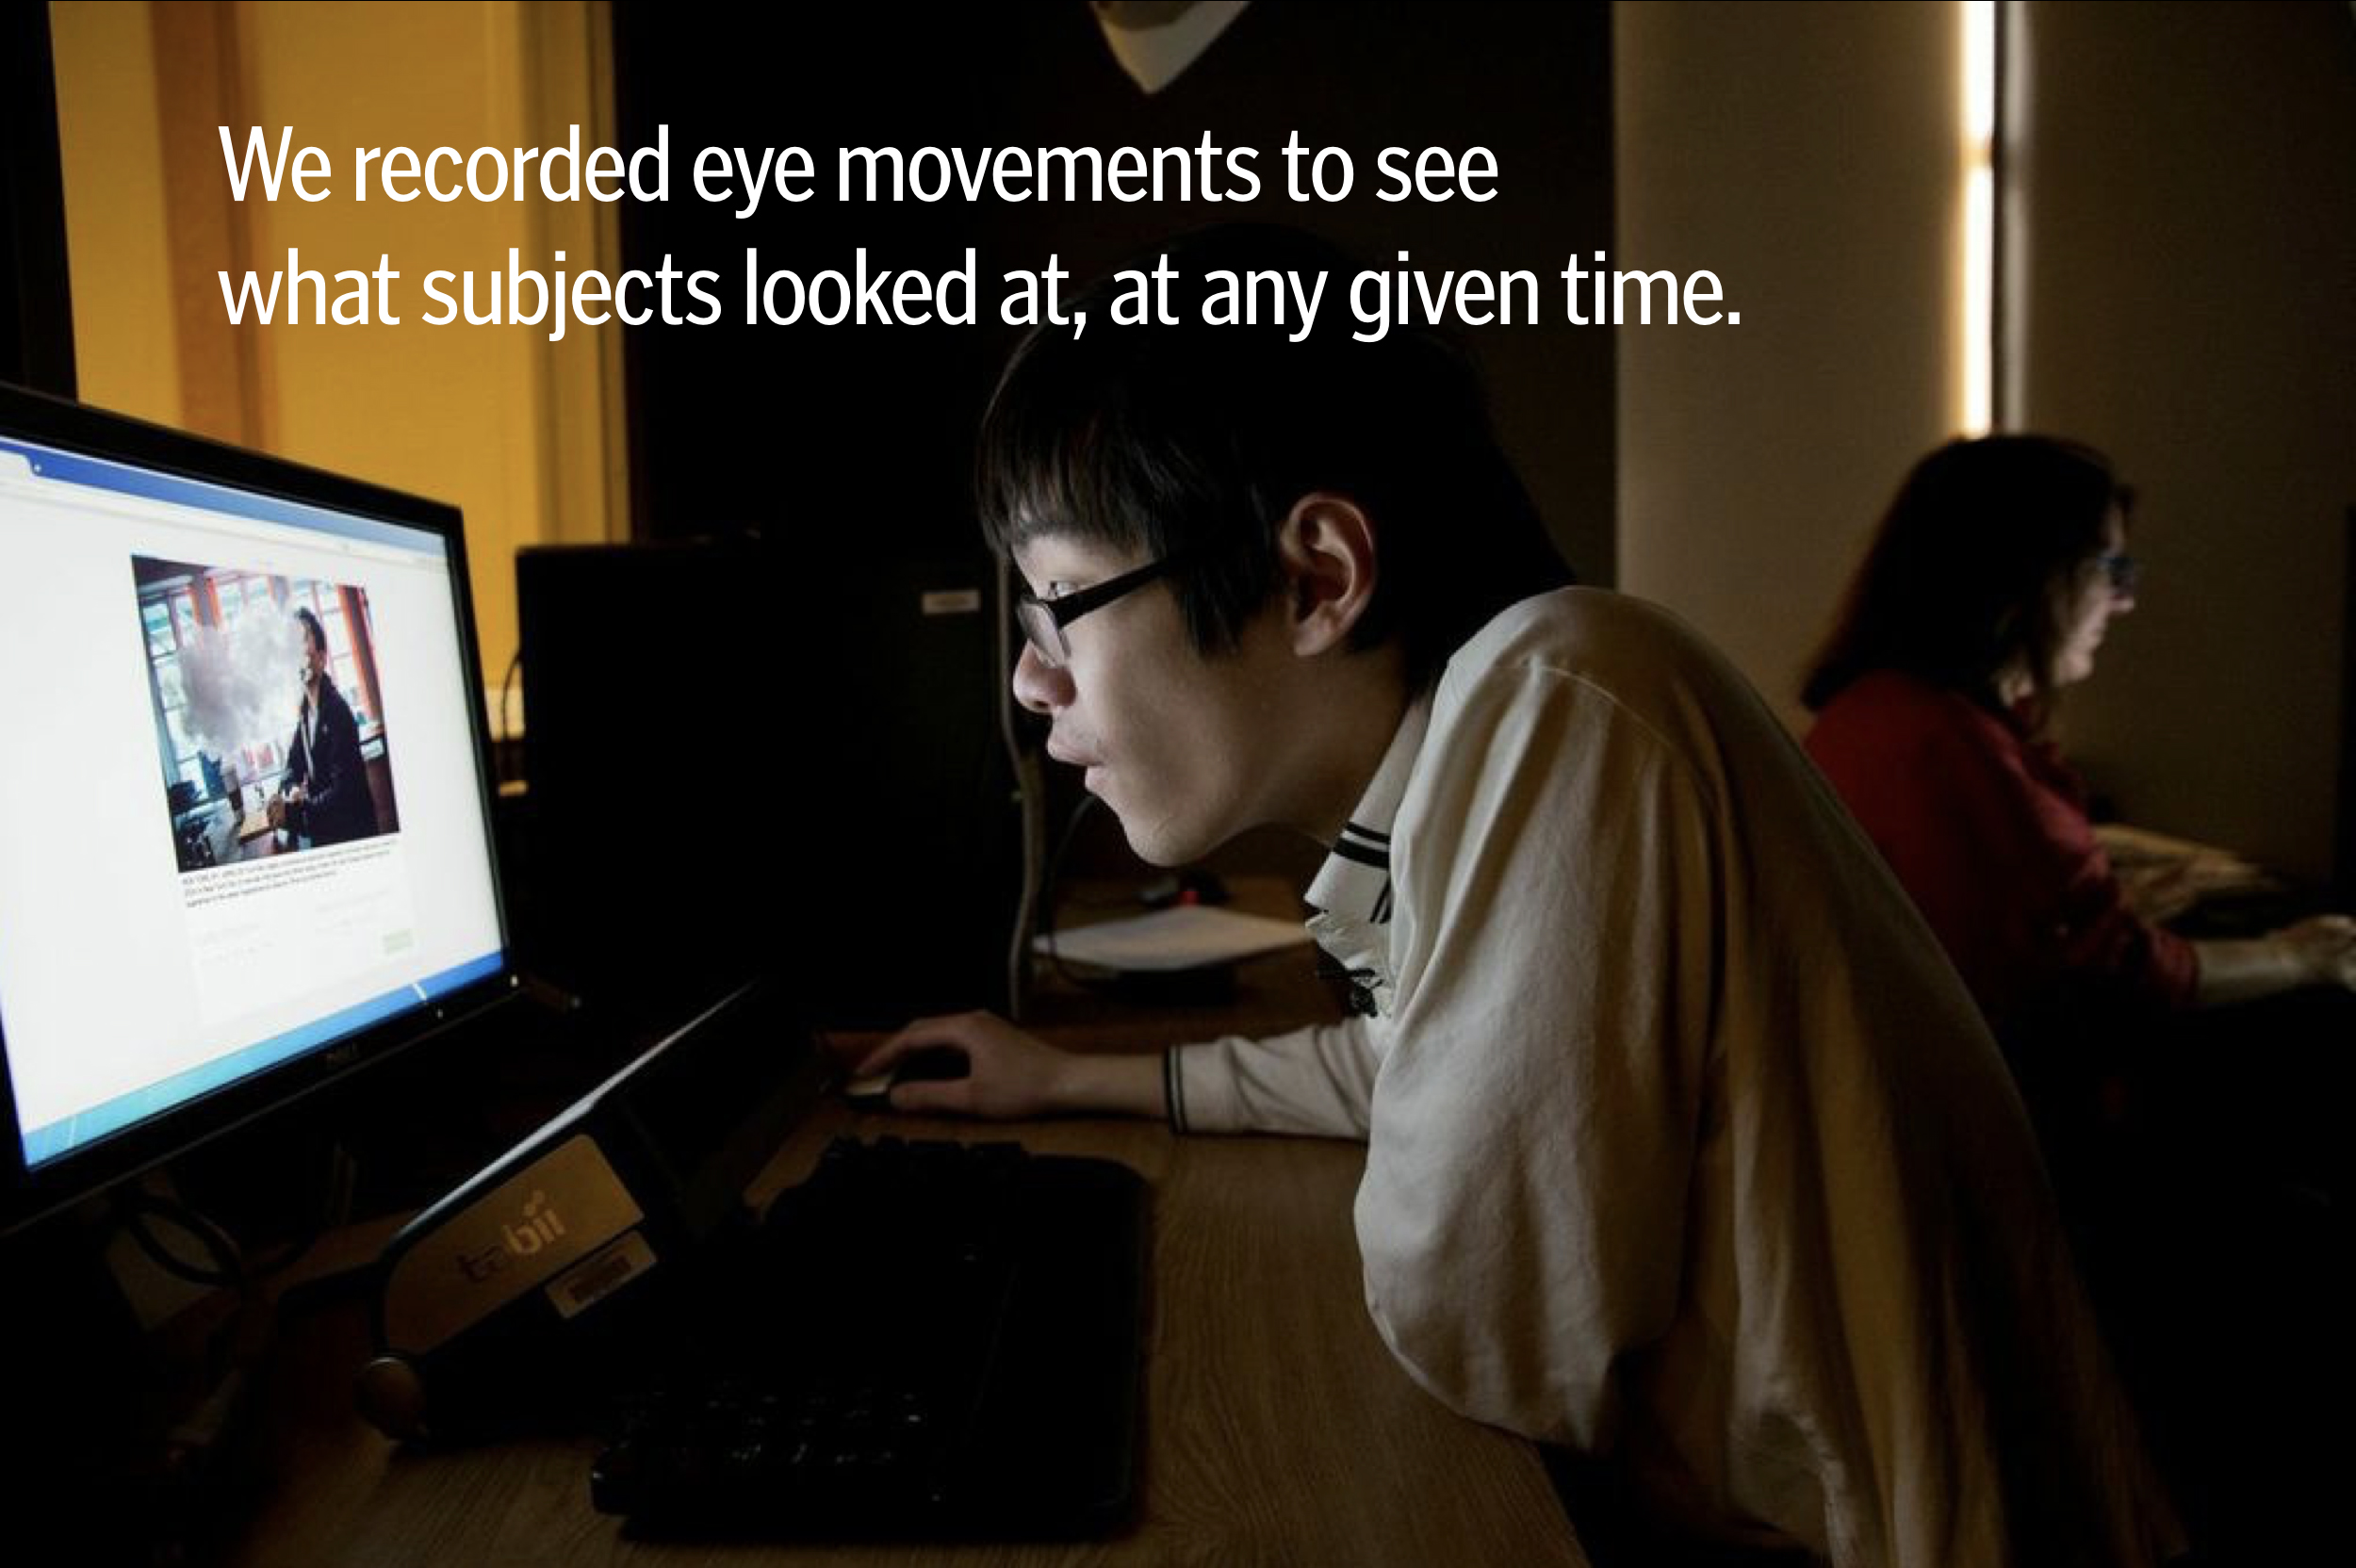 We recorded eye movements to see what subjects looked at, at any given time